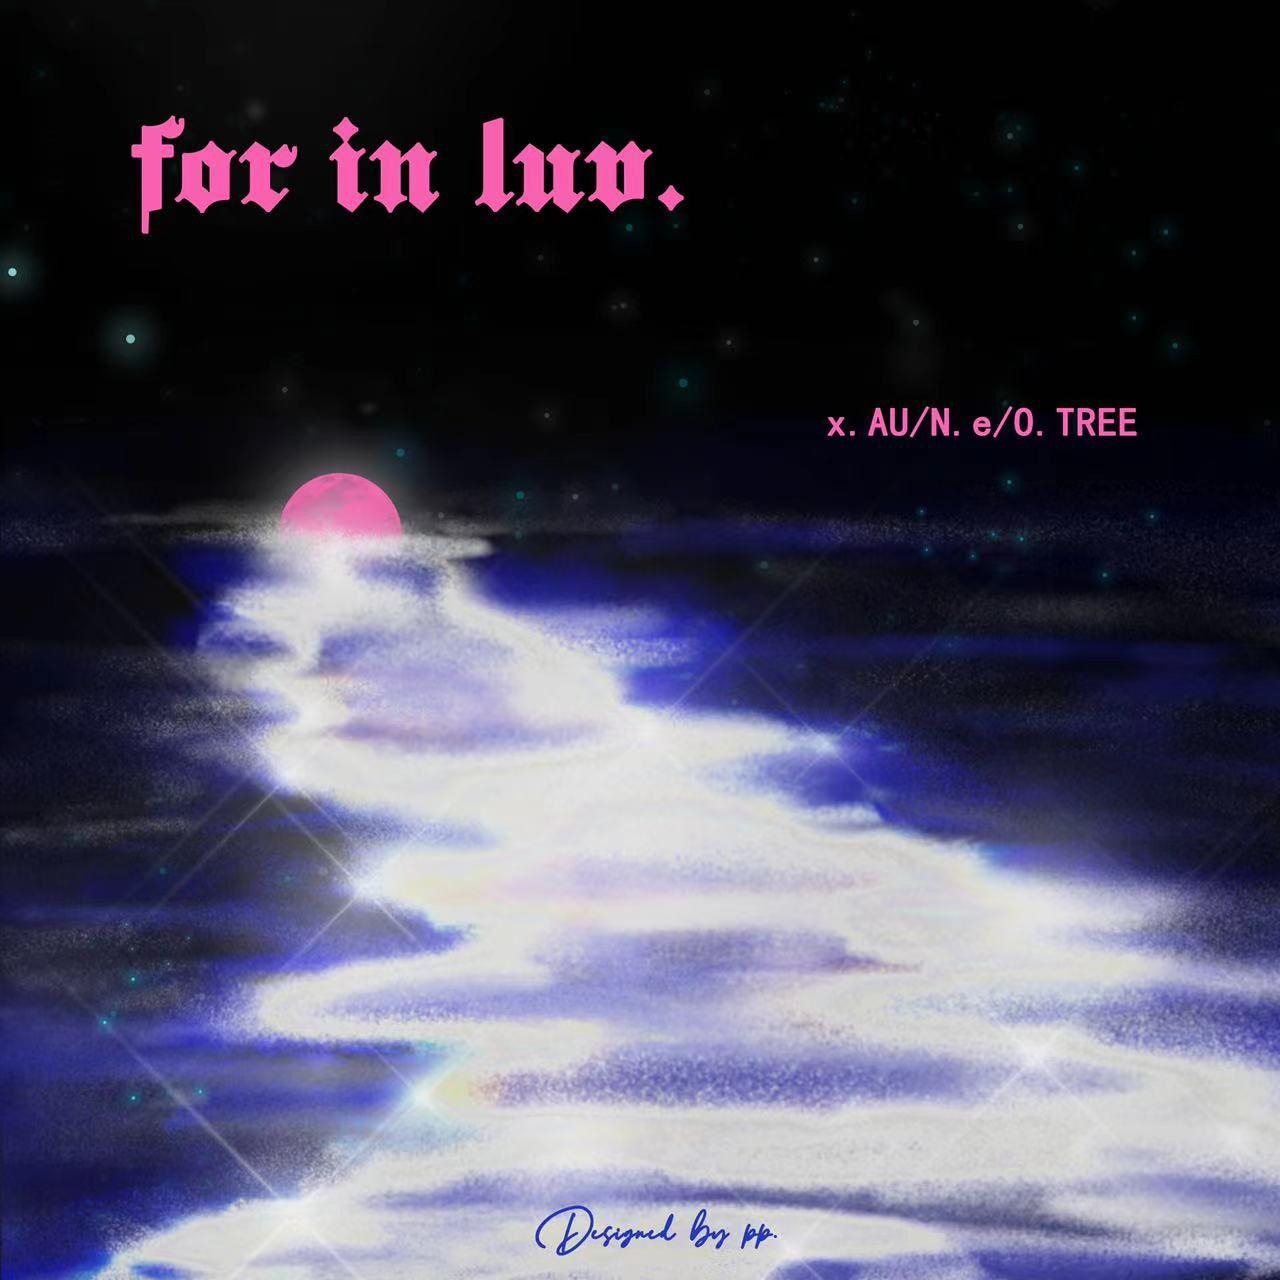 x.AU - For in luv